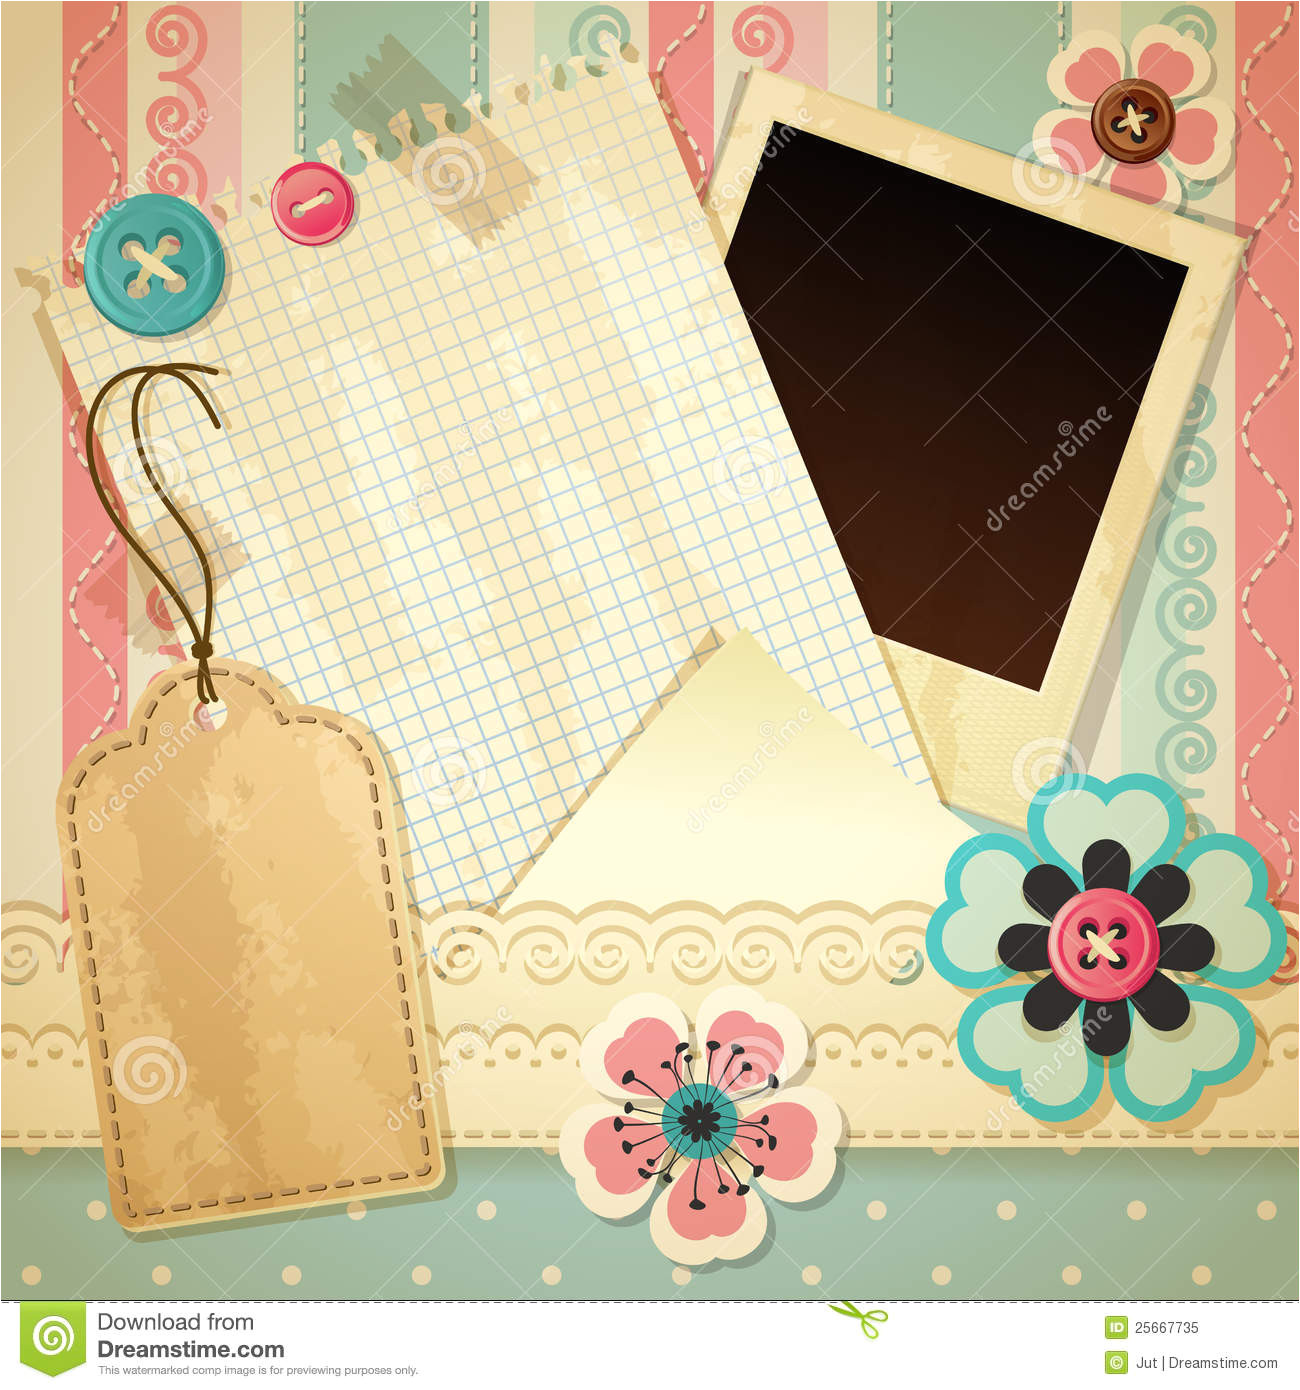 royalty free stock photo scrapbook template image25667735